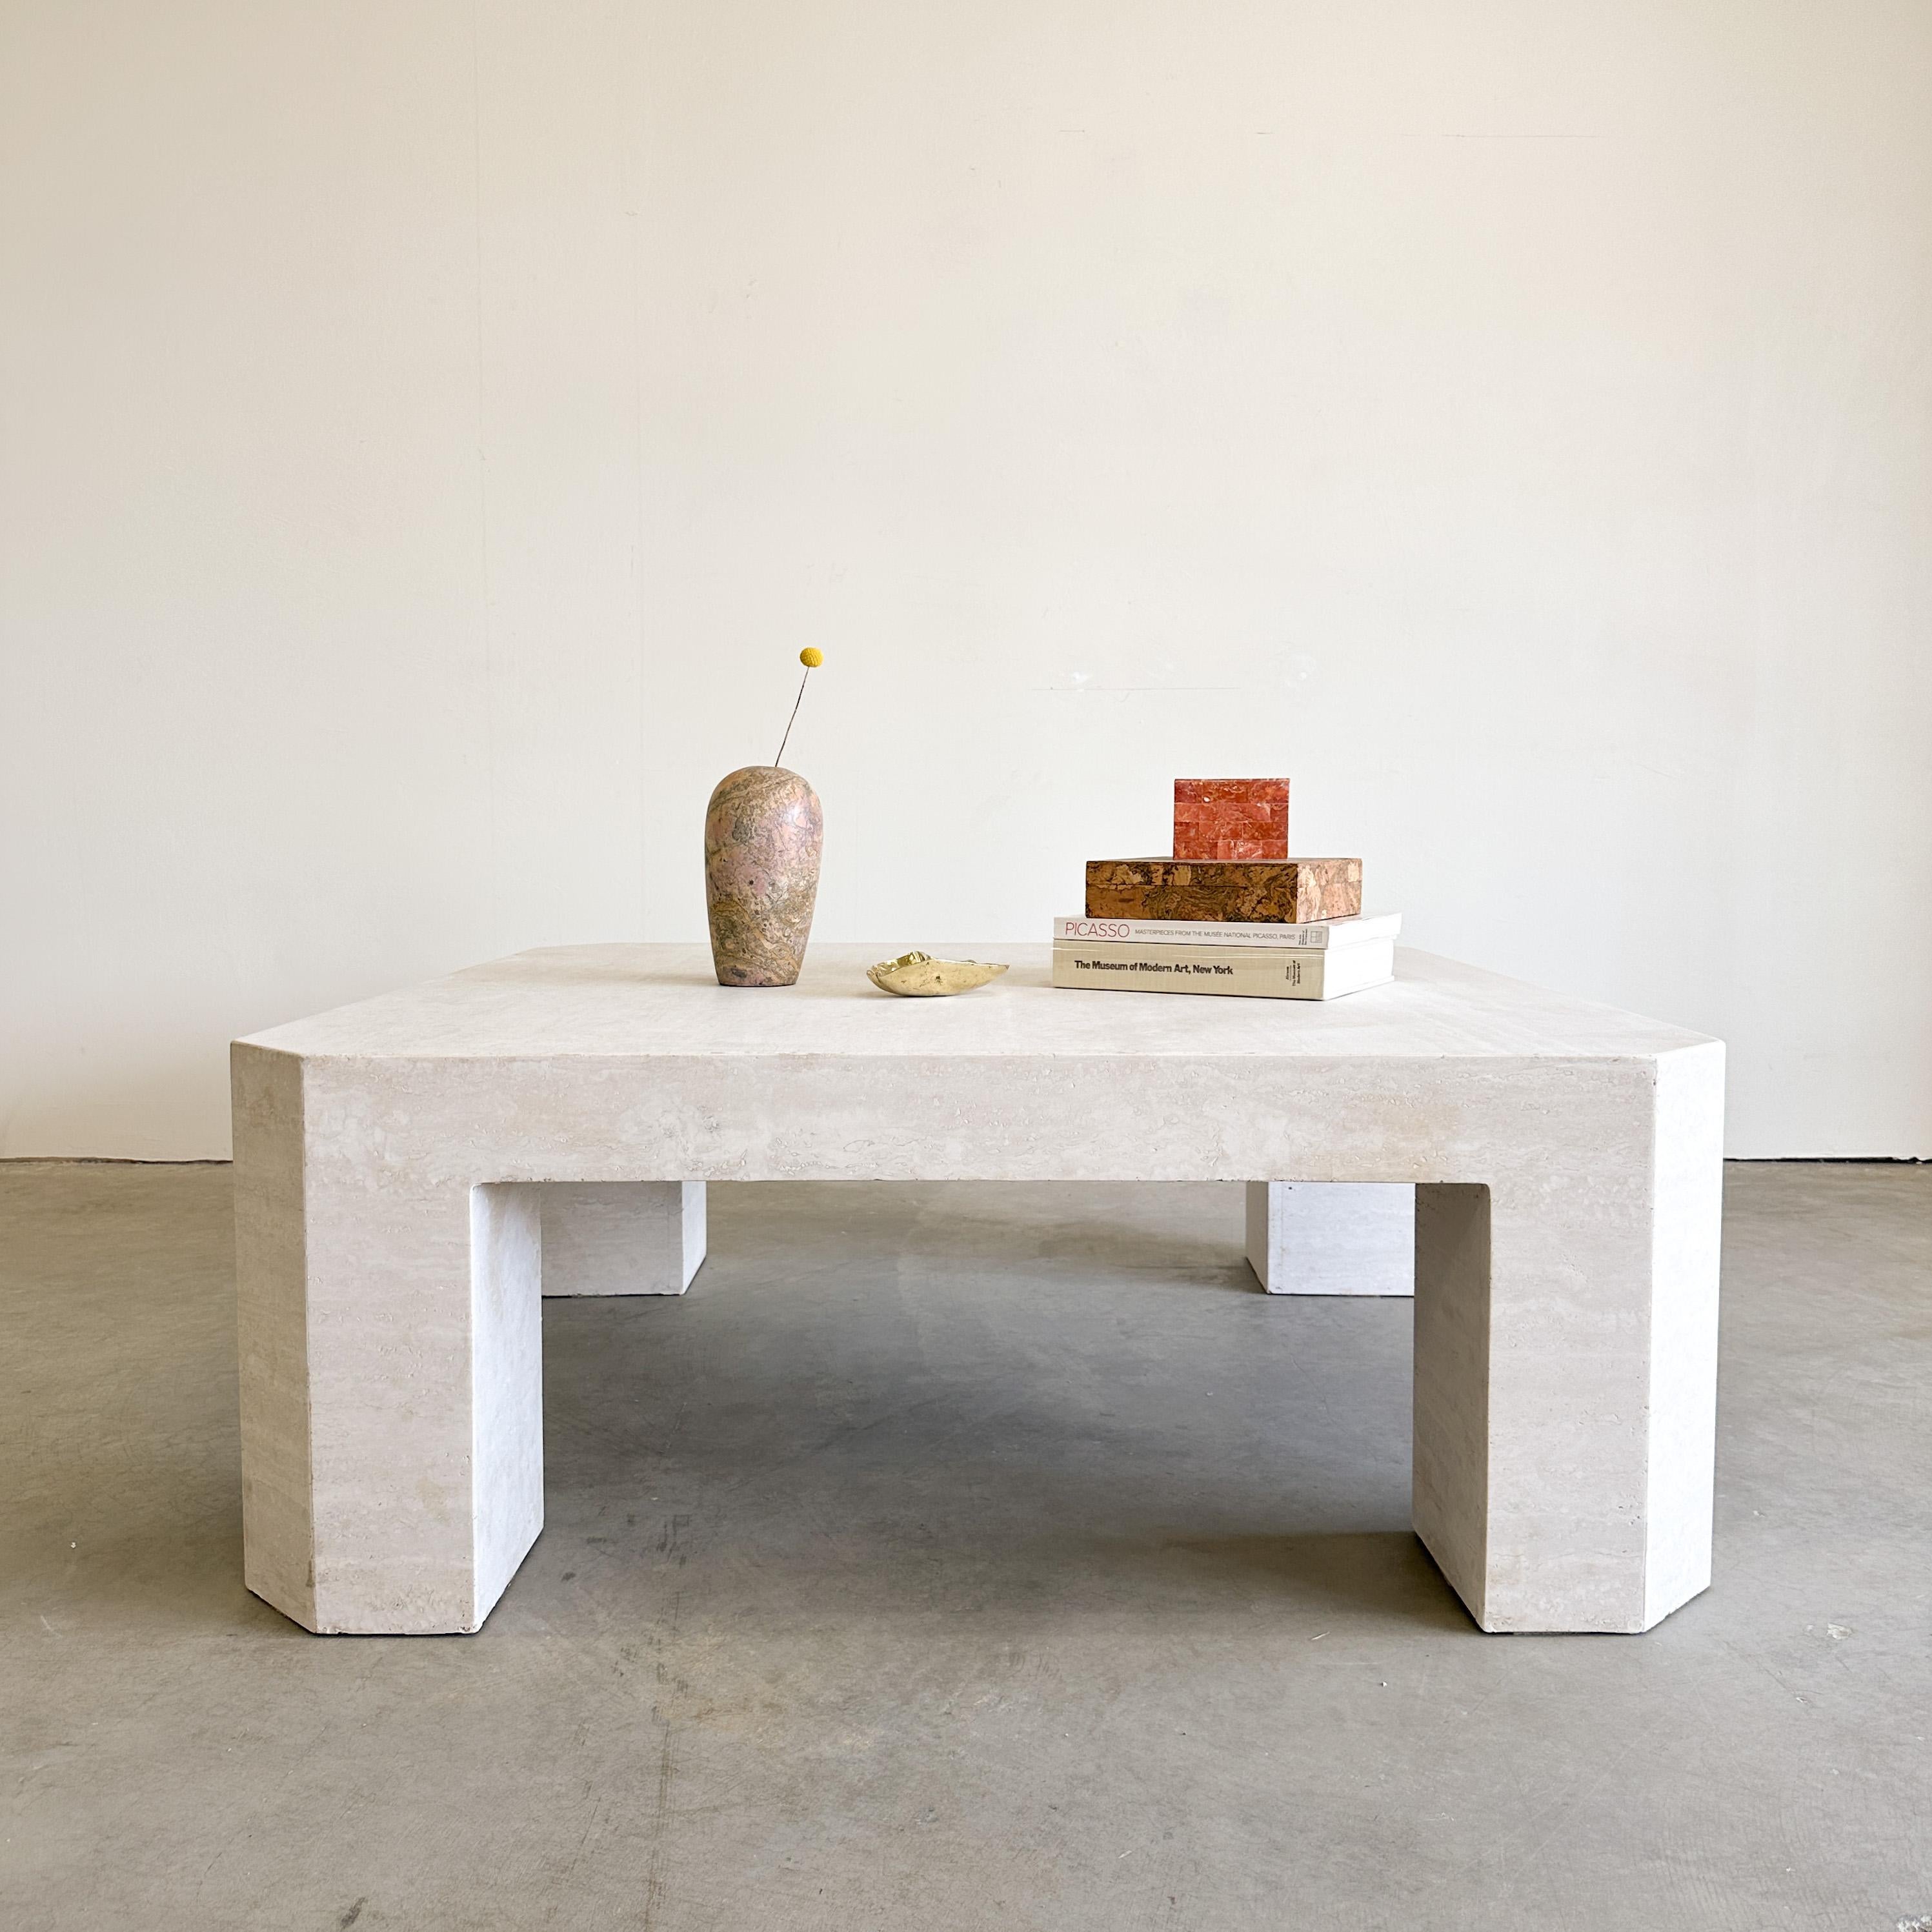 Vintage Light Cream Travertine Coffee Table.

The table is made out of travertine and honed and has no shine.
Very heavy 200 pounds.

Color: Natural, light cream travertine.

Measurements:
length: 48